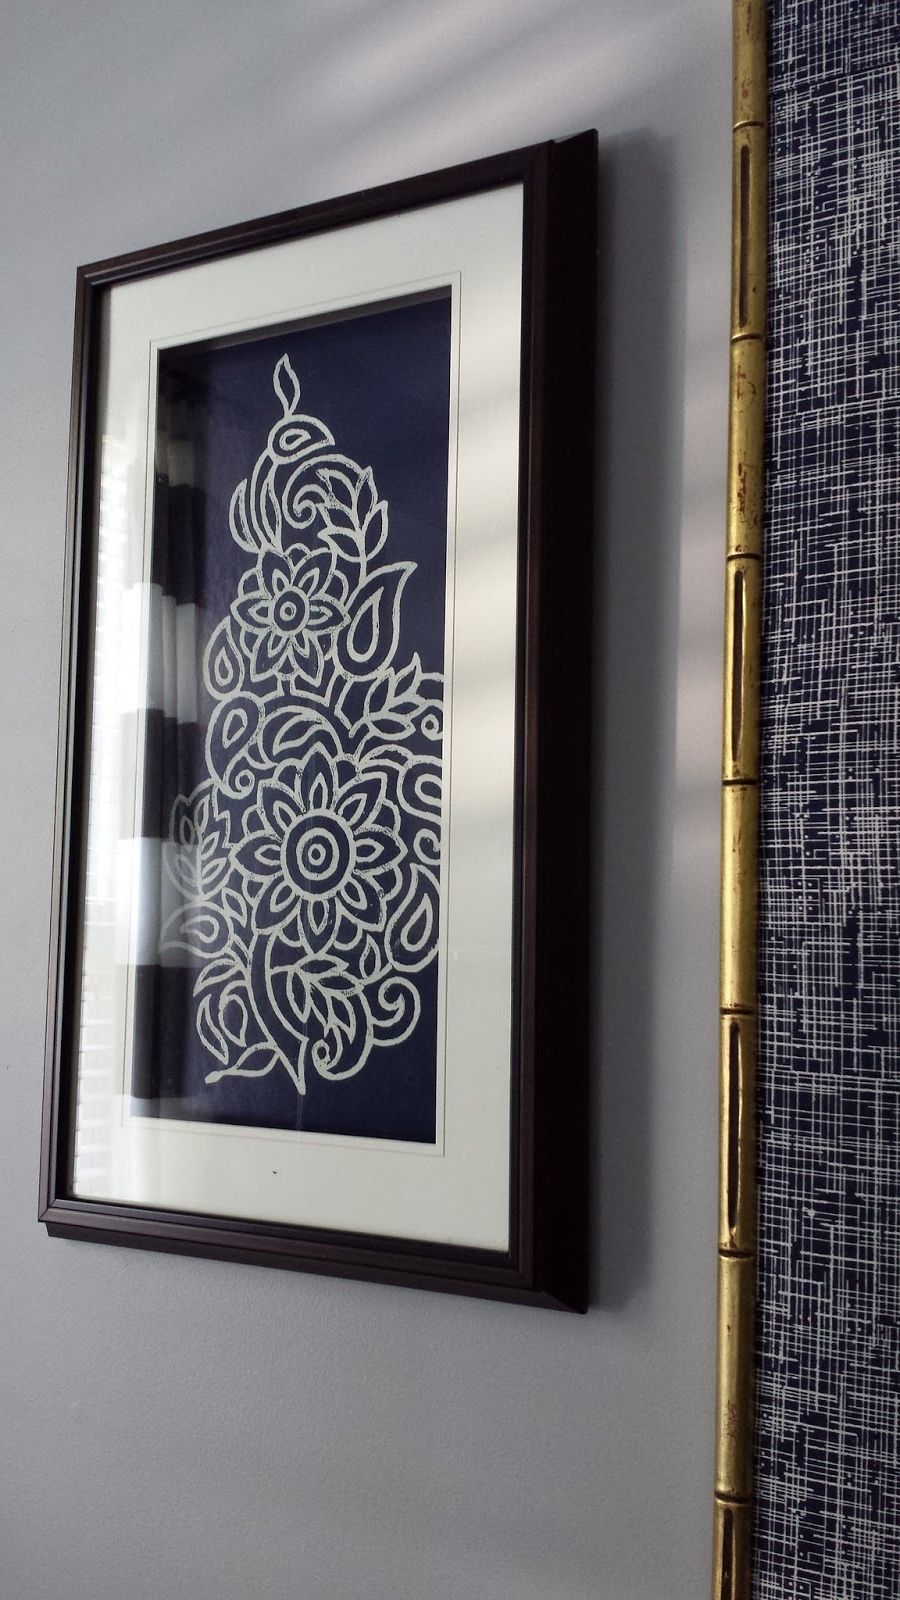 Framed Fabric Wall Art Within Recent Focal Point Styling: Diy Indigo Wall Art With Framed Fabric (View 3 of 15)